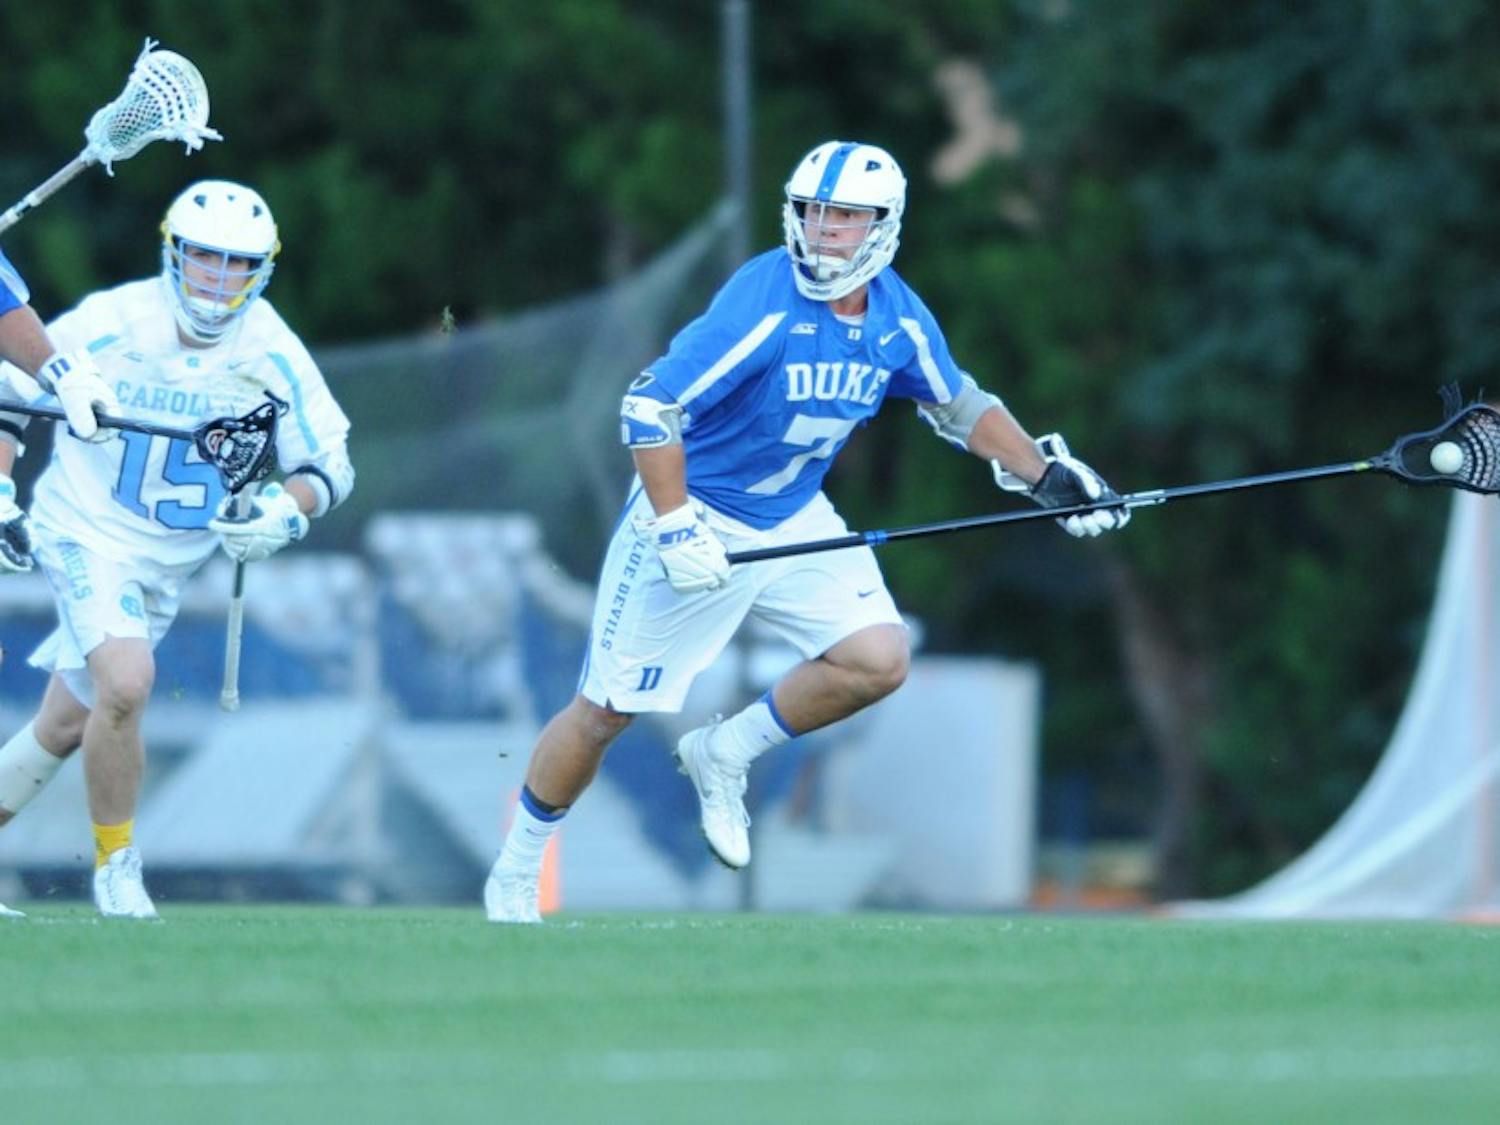 Cade Van Raaphorst has been one of the anchors for a Duke defense that has limited its opponents to just five second-half goals in the last two games.